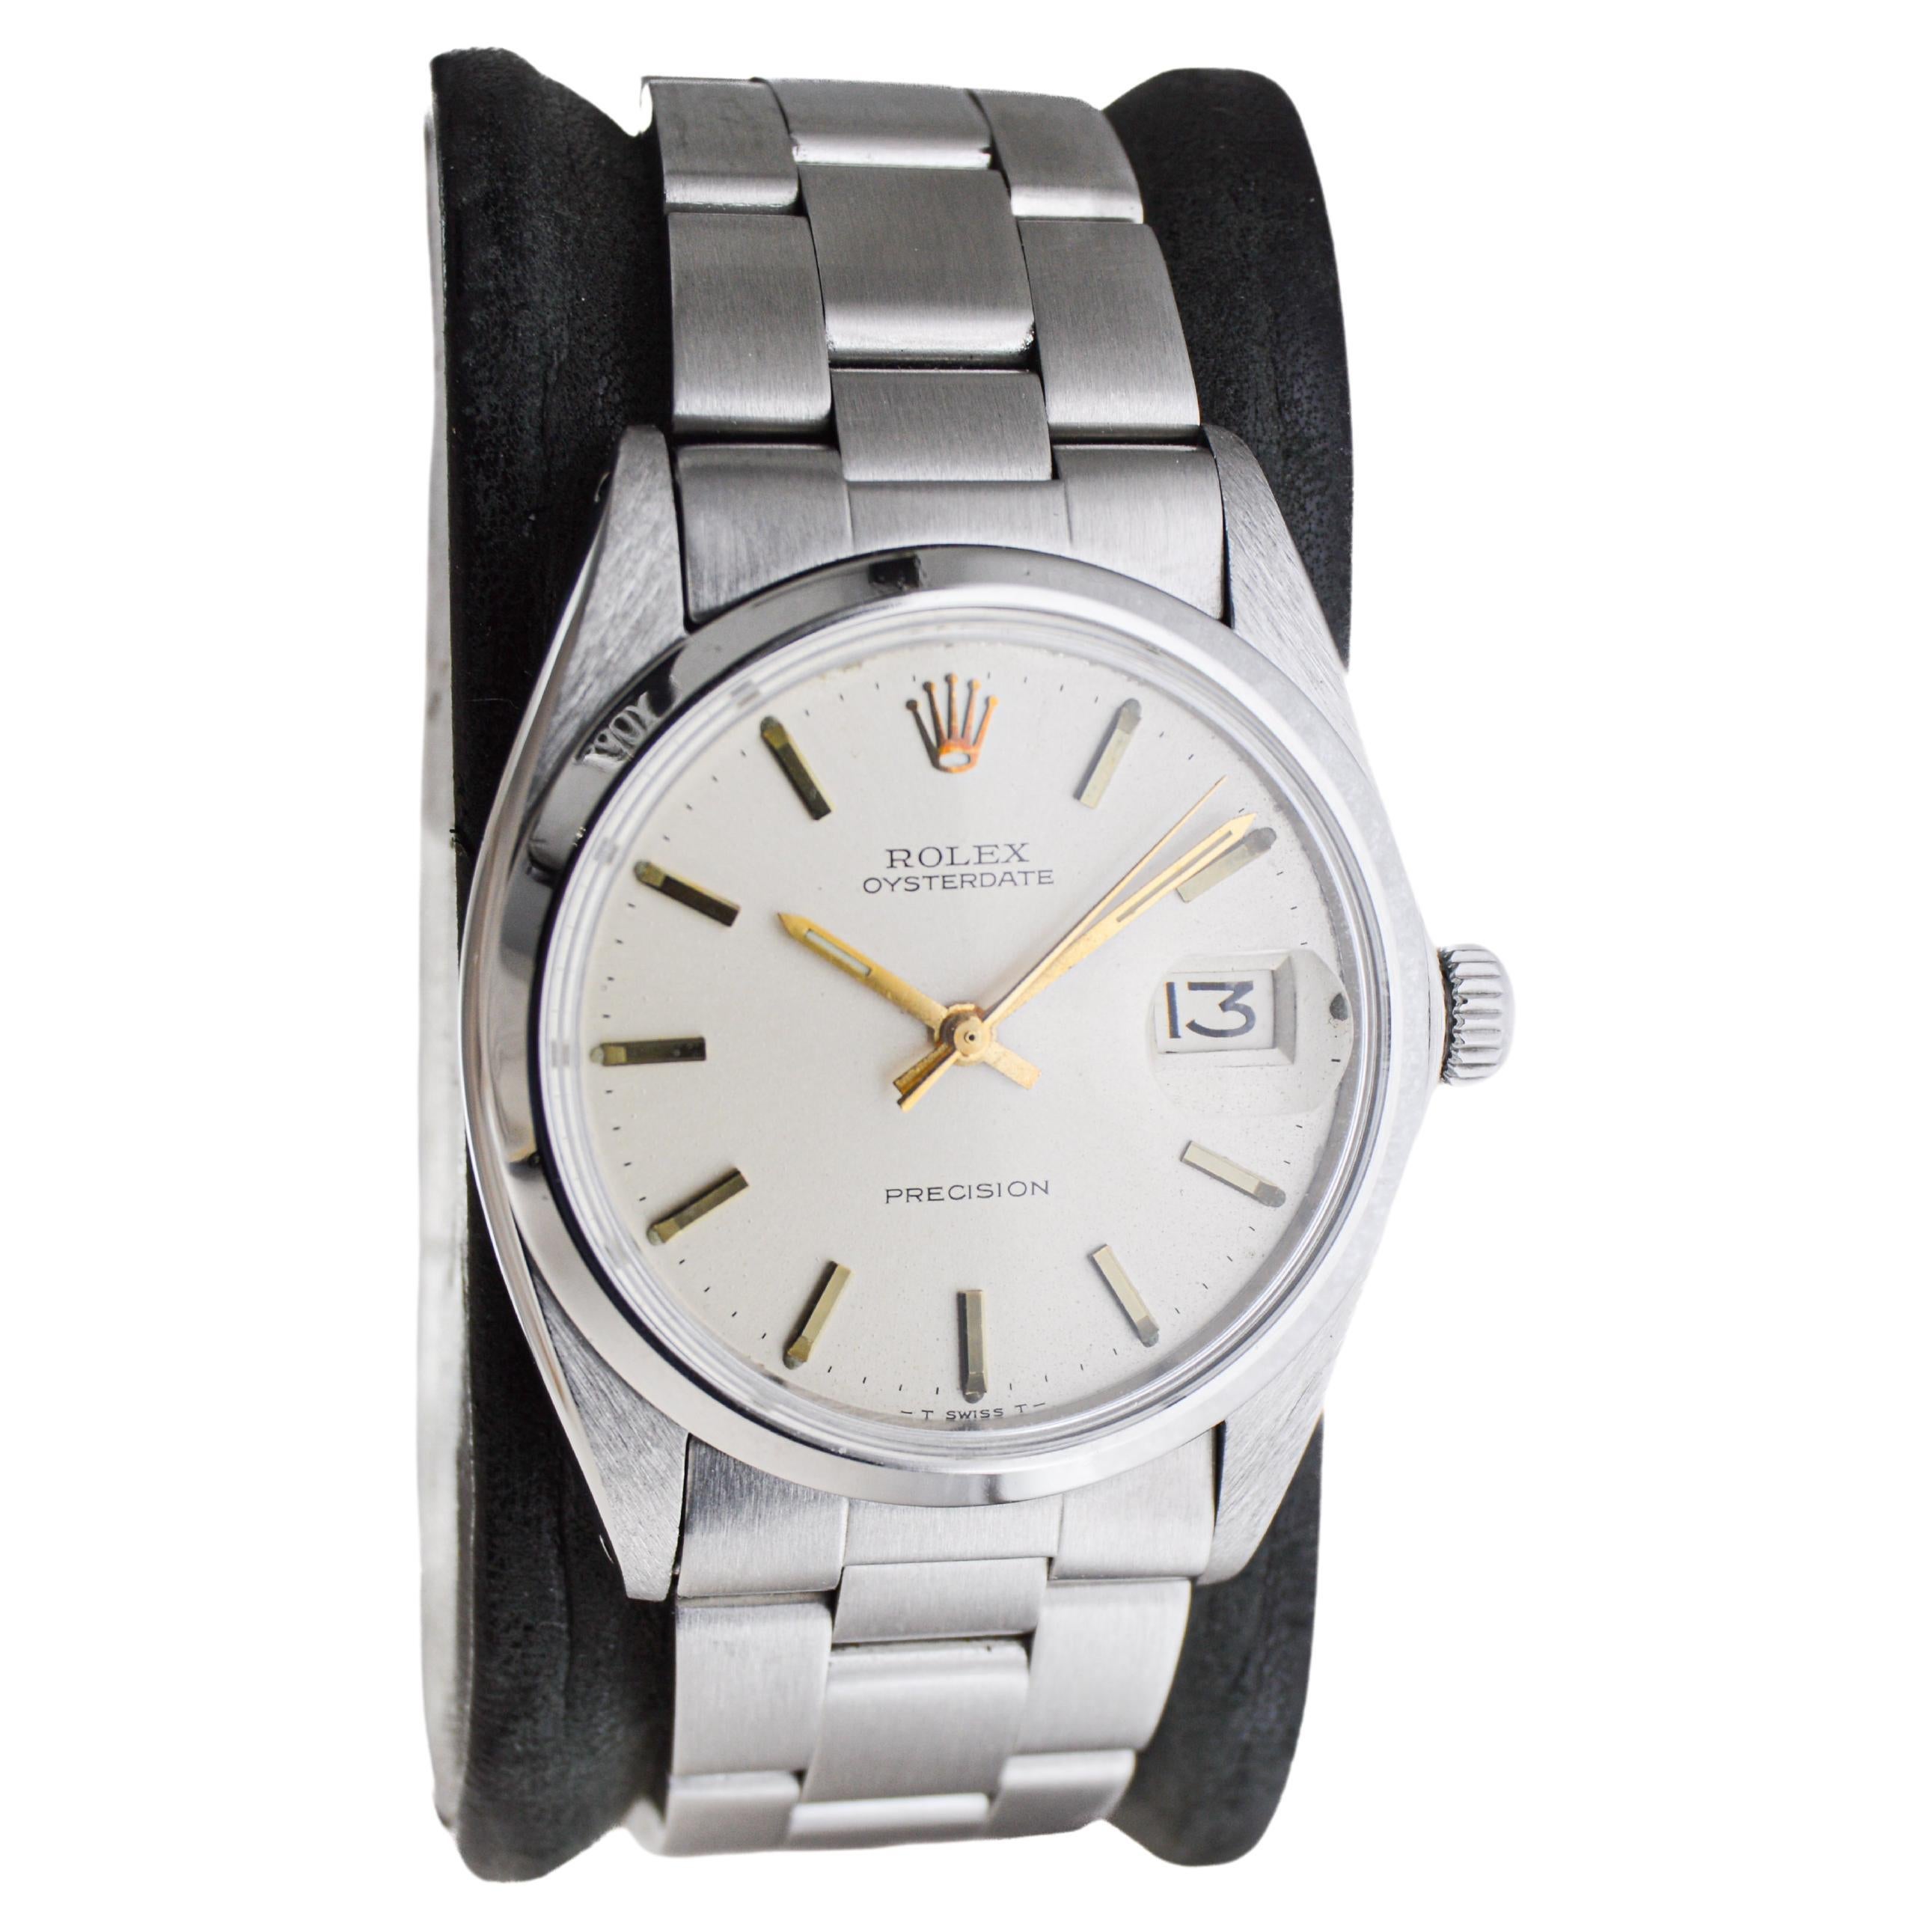 FACTORY / HOUSE: Rolex Watch Company
STYLE / REFERENCE: Oysterdate / Reference 6694
METAL / MATERIAL: Stainless Steel
CIRCA / YEAR: 1966
DIMENSIONS / SIZE: Length 43mm X Diameter 35mm
MOVEMENT / CALIBER: Manual Winding / 17 Jewels / Caliber